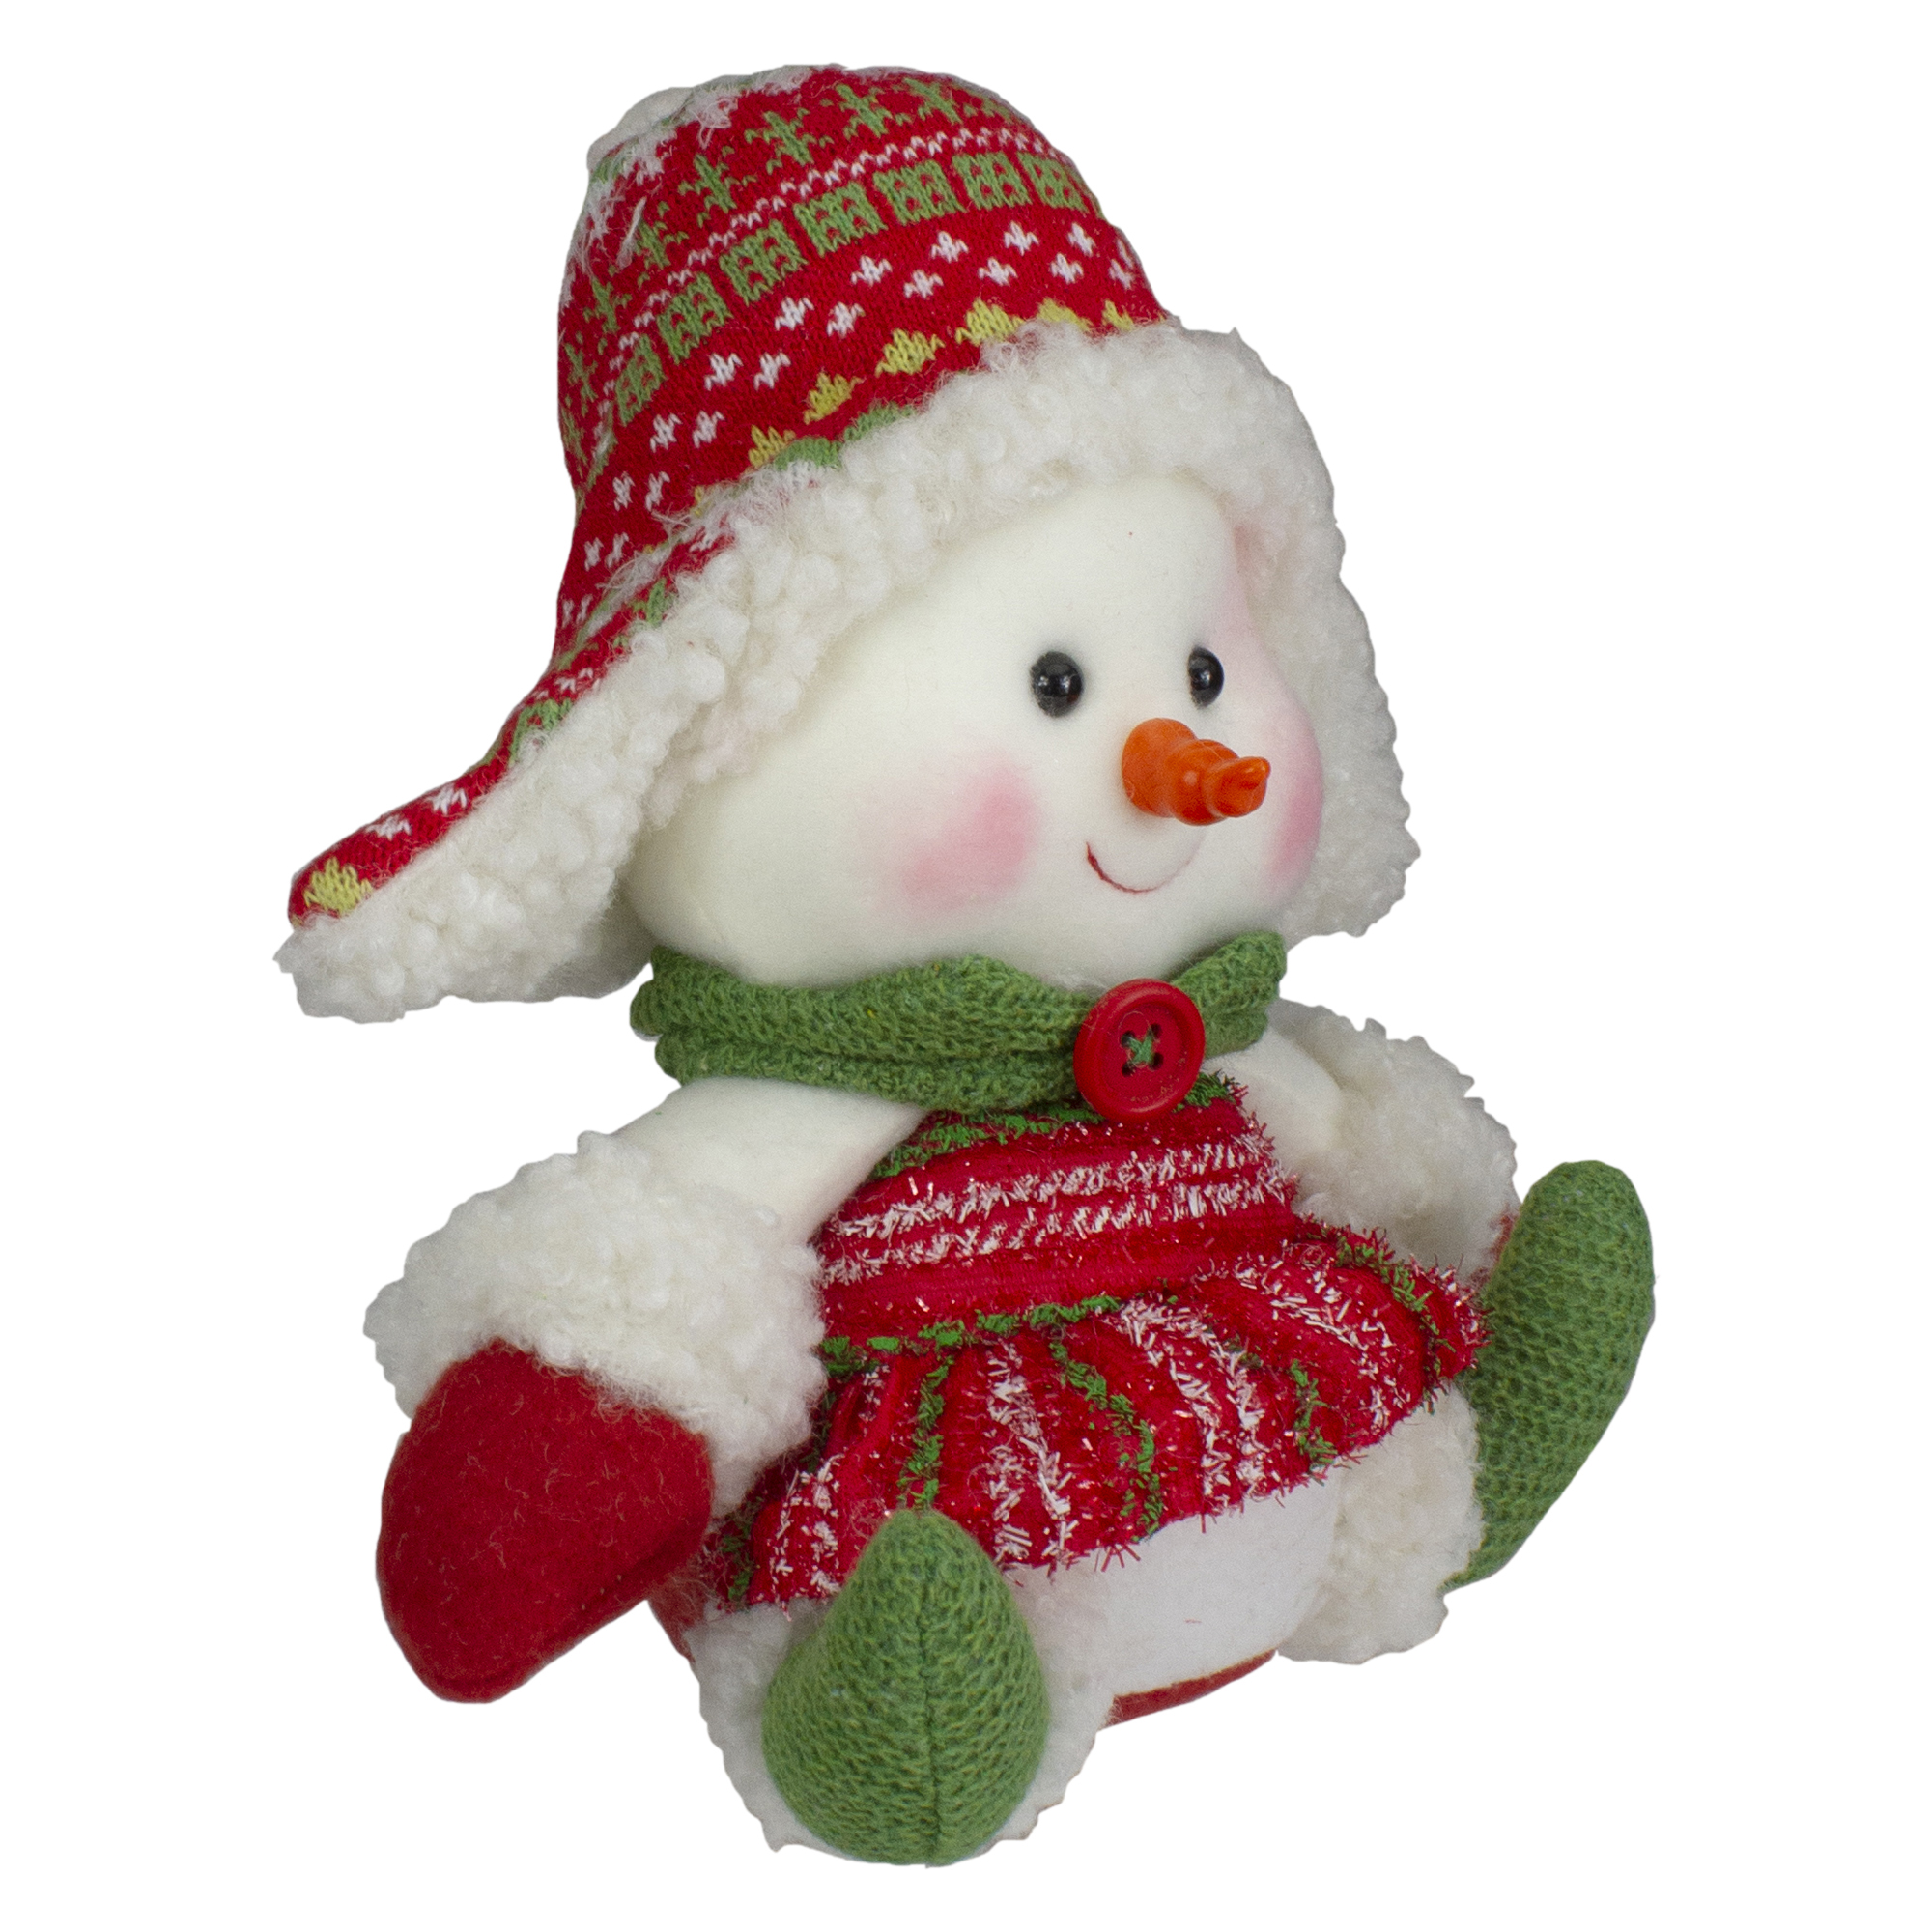 Northlight 8" Red and Green Sitting Snowman Girl Christmas Figure